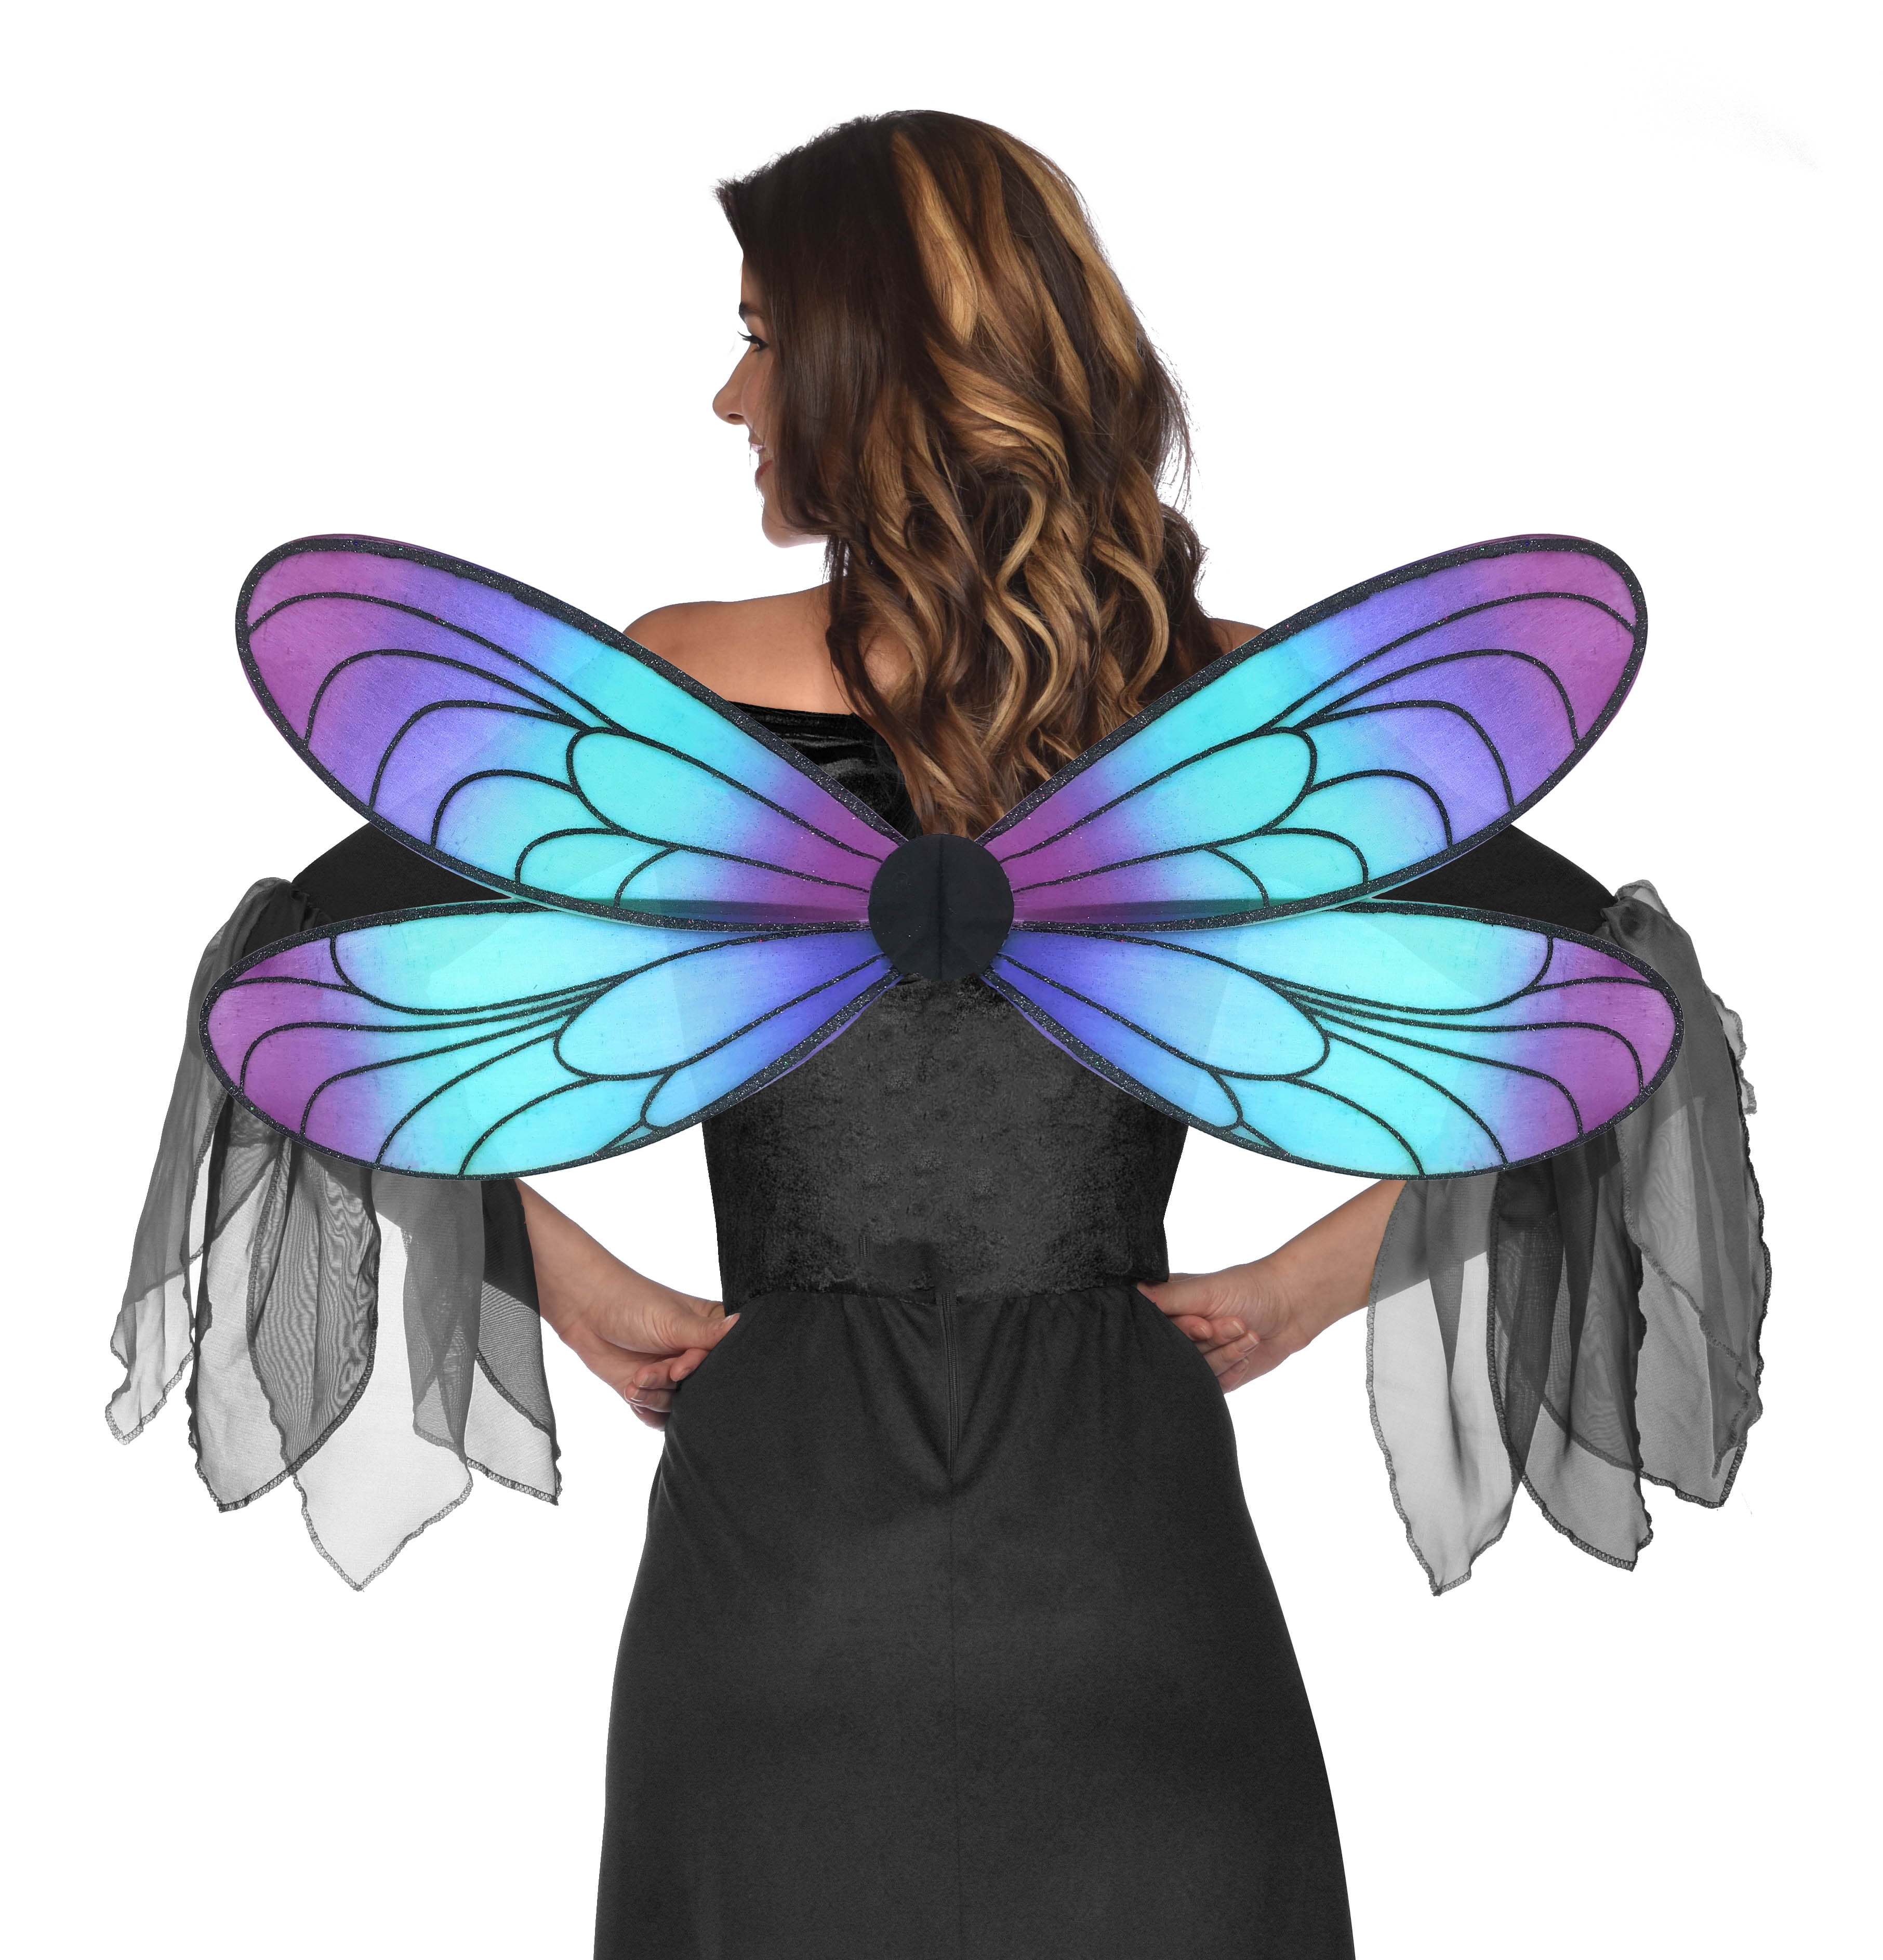 WAY TO CELEBRATE! Way To Celebrate Halloeen Dress Up Dragonfly Wings-Purple And Blue Adult Female